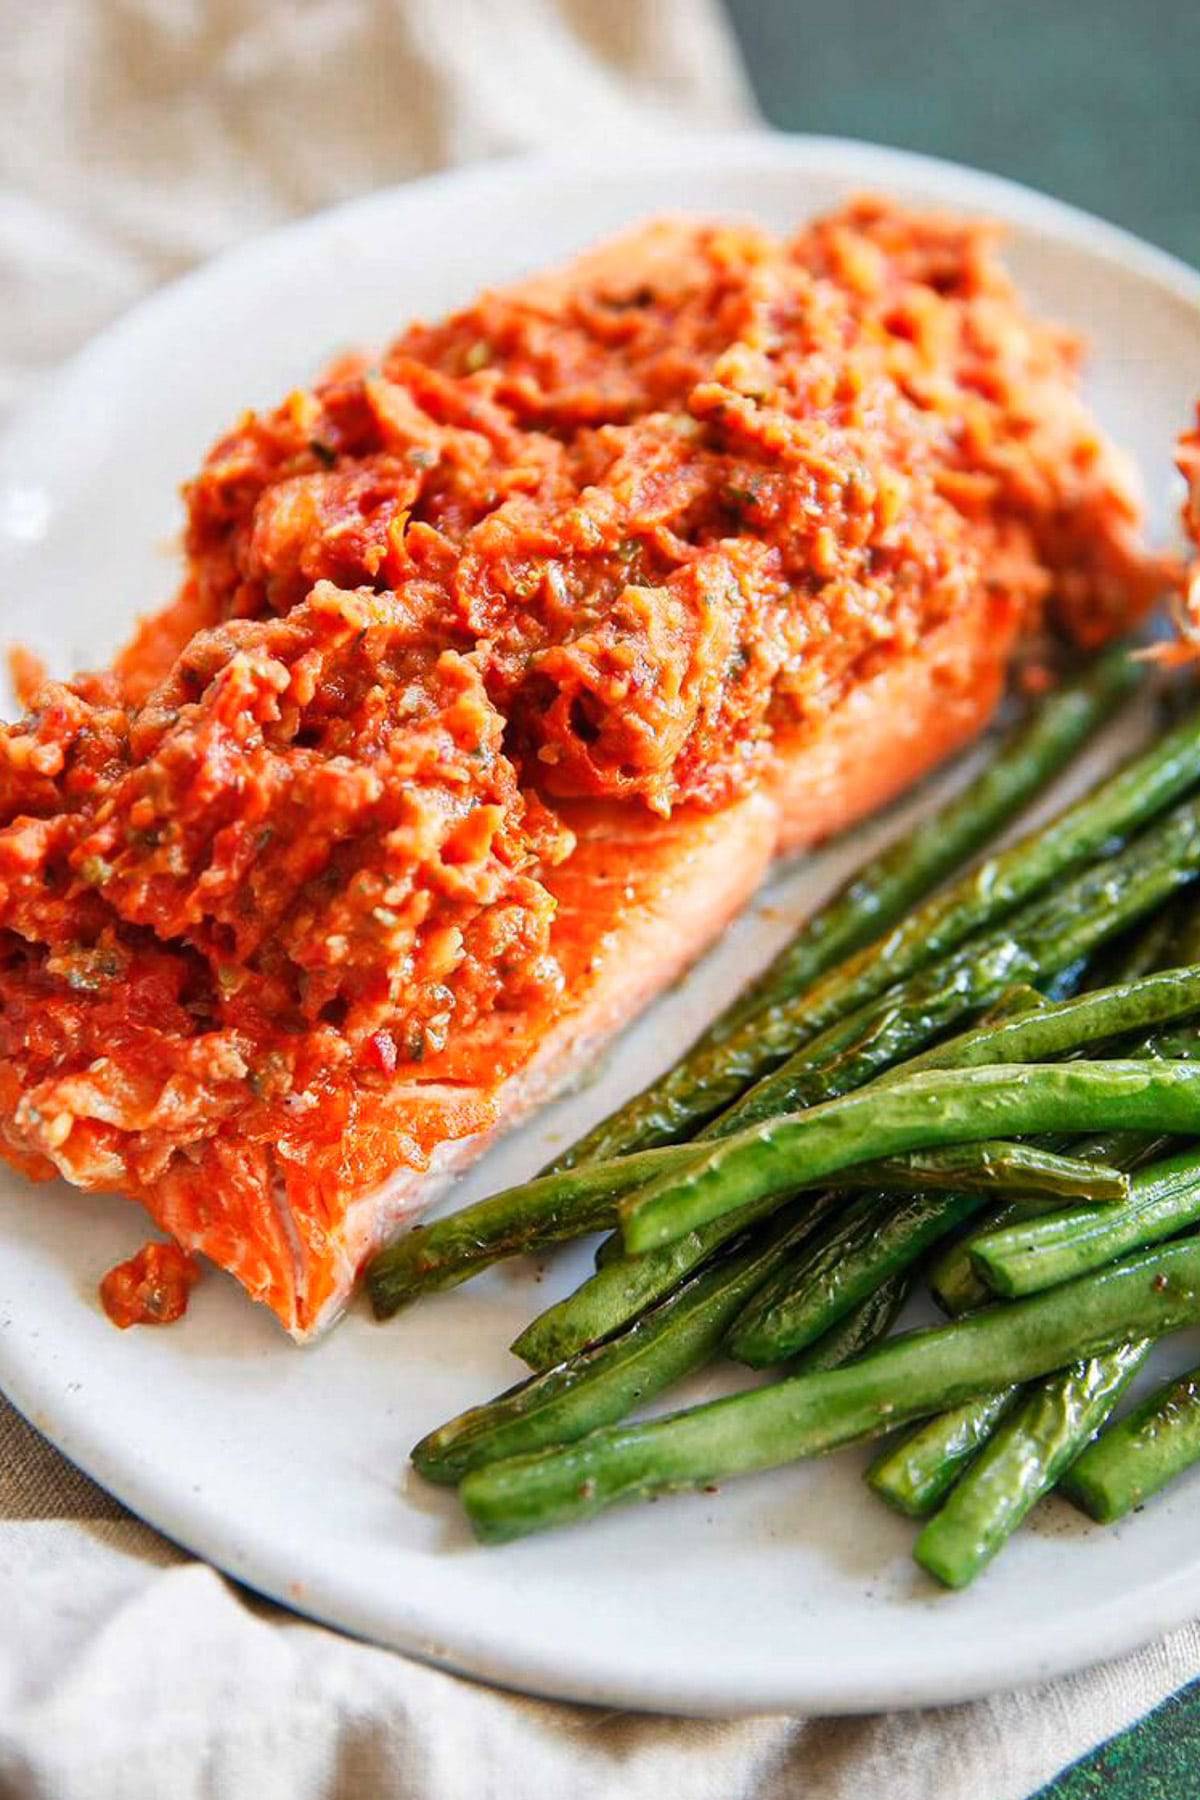 Salmon topped with puttanesca.